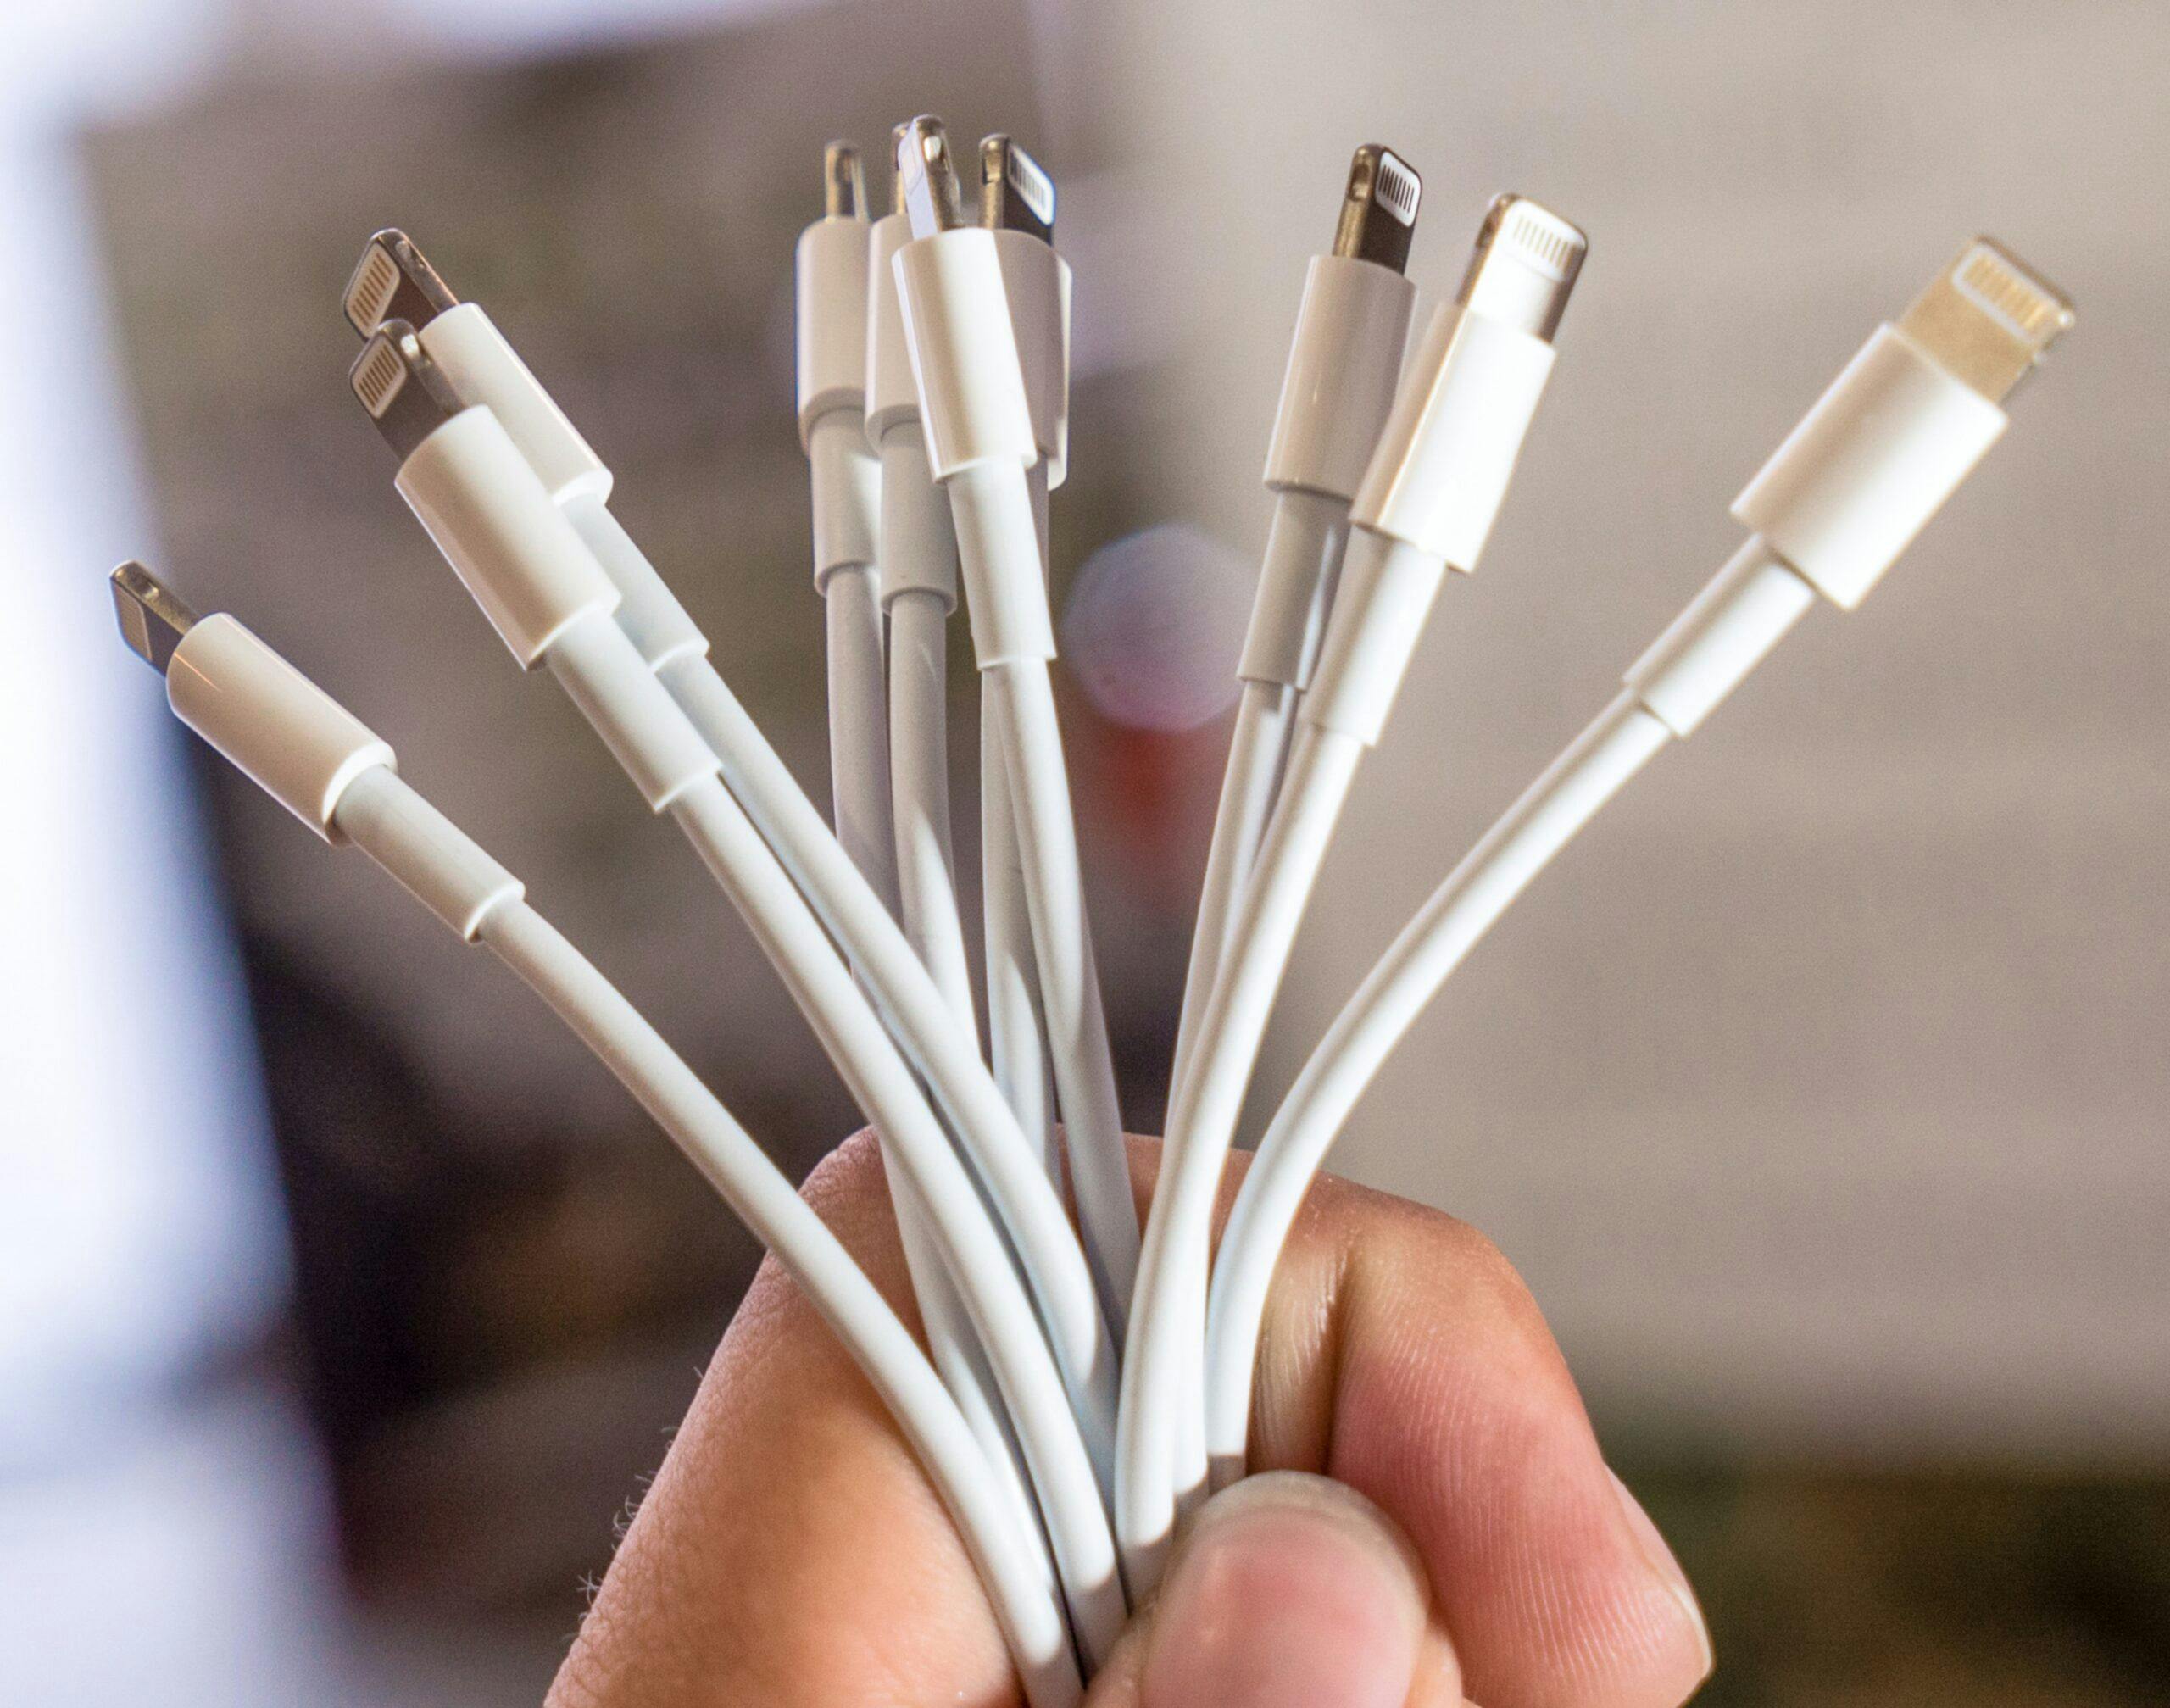 What happens to all the outdated iPhone cords?